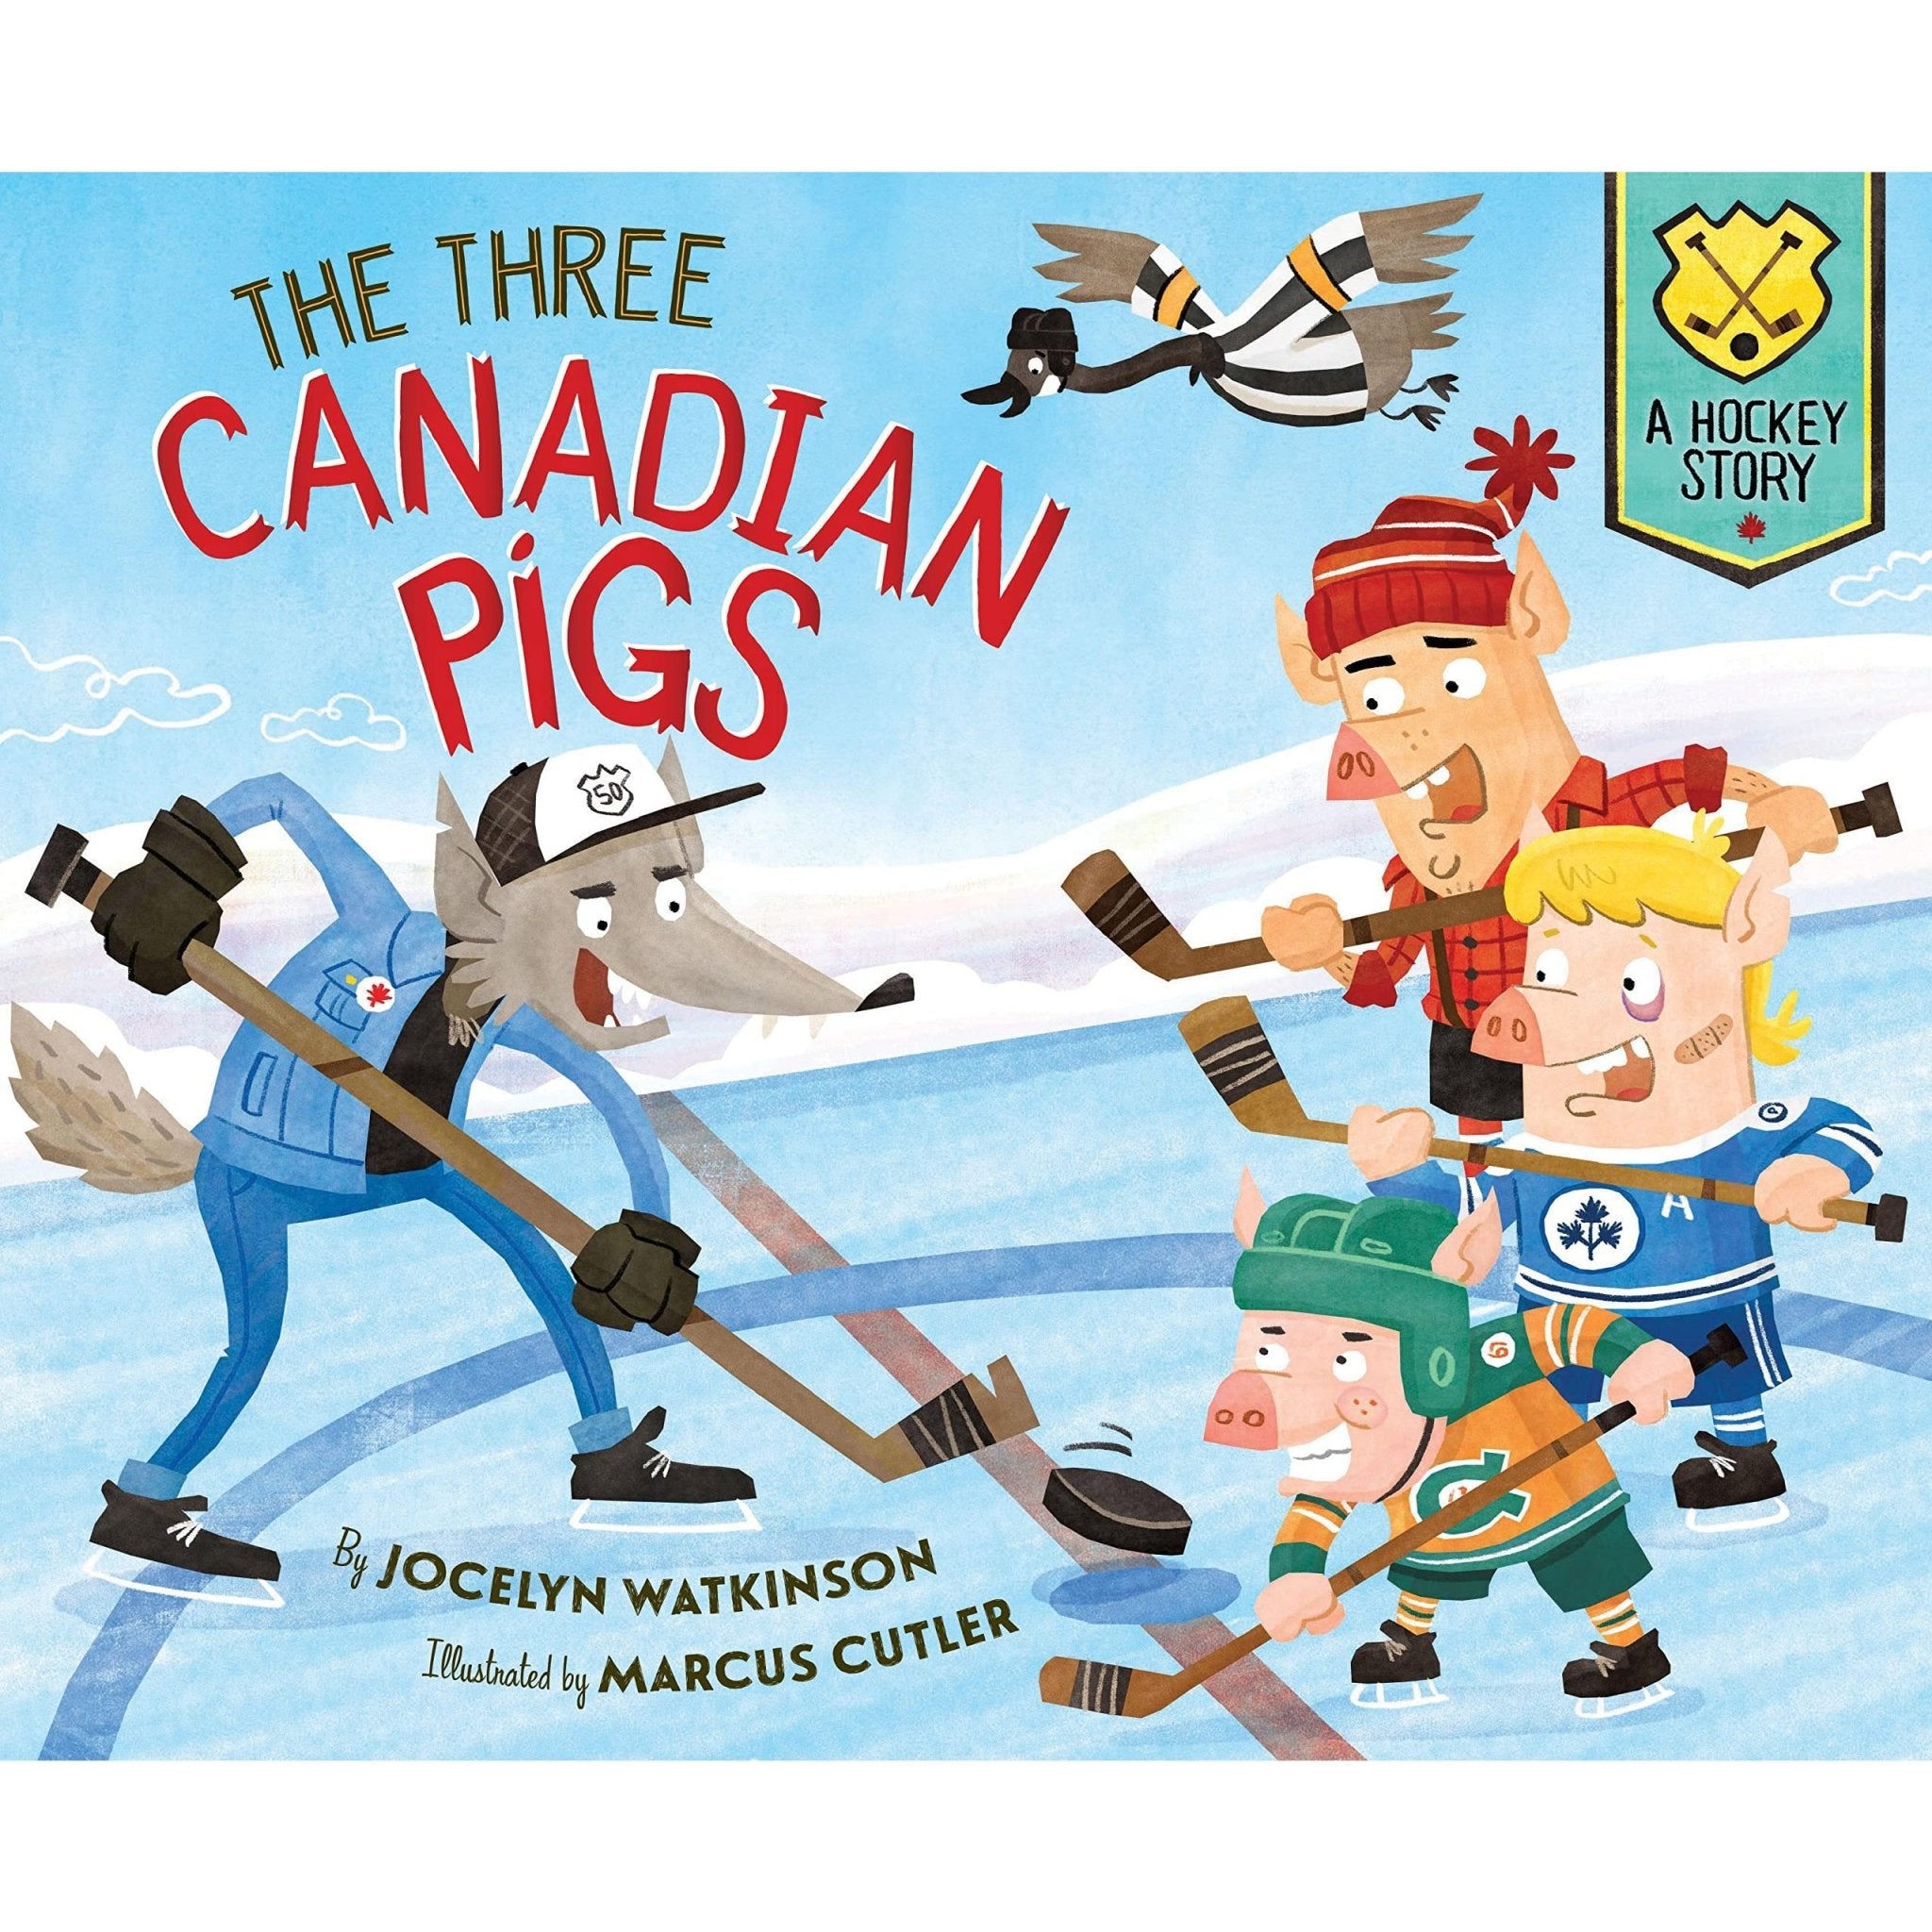 The Three Canadian Pigs: A Hockey Story - Hardcover Book